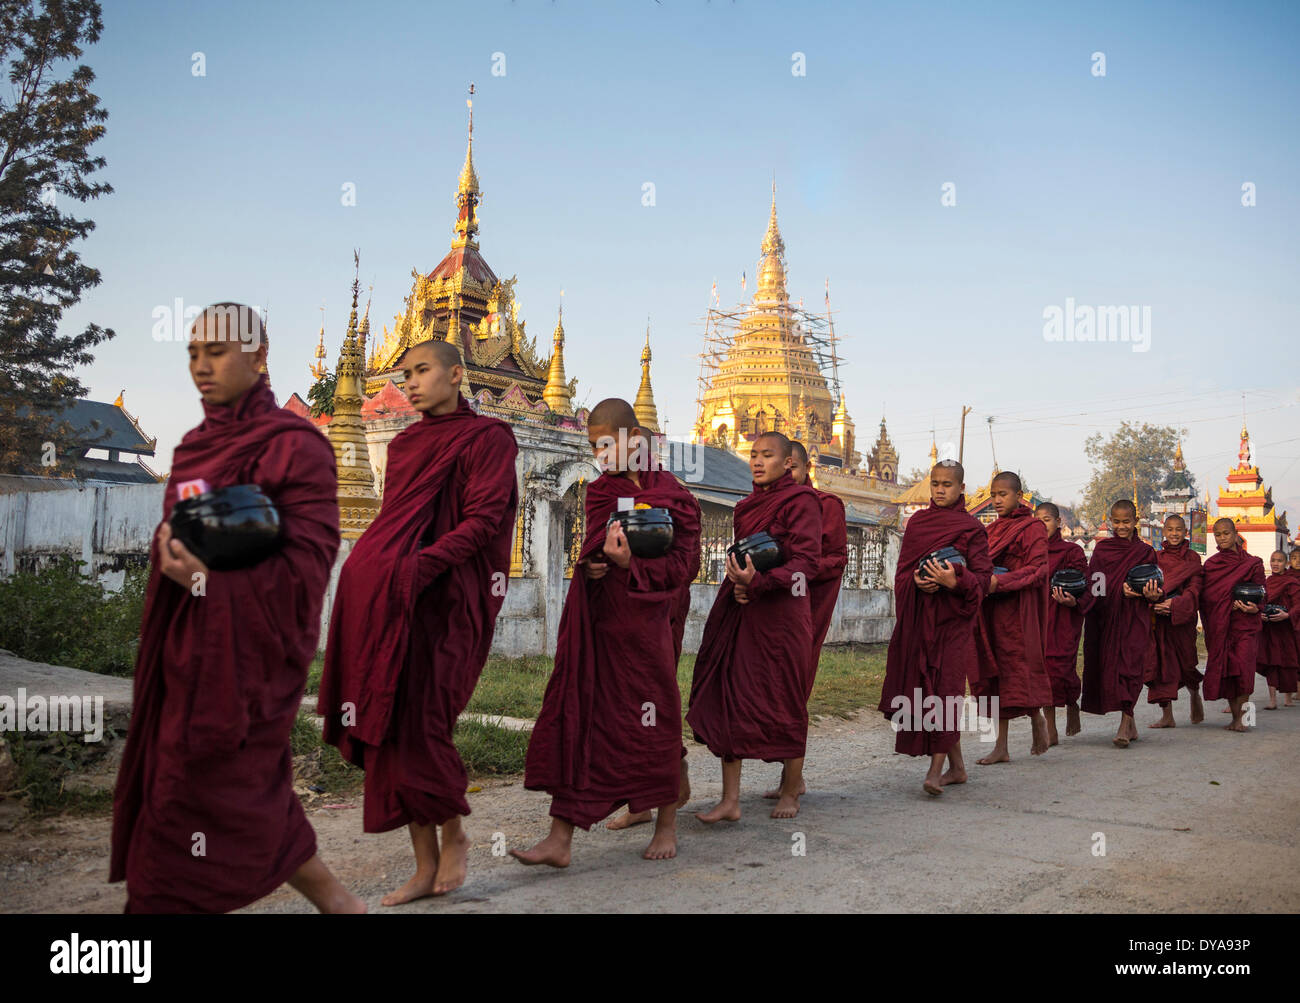 Nyaungshwe Myanmar Burma Asia architecture Buddhism colourful early lake monastery morning red monks religion temple touris Stock Photo